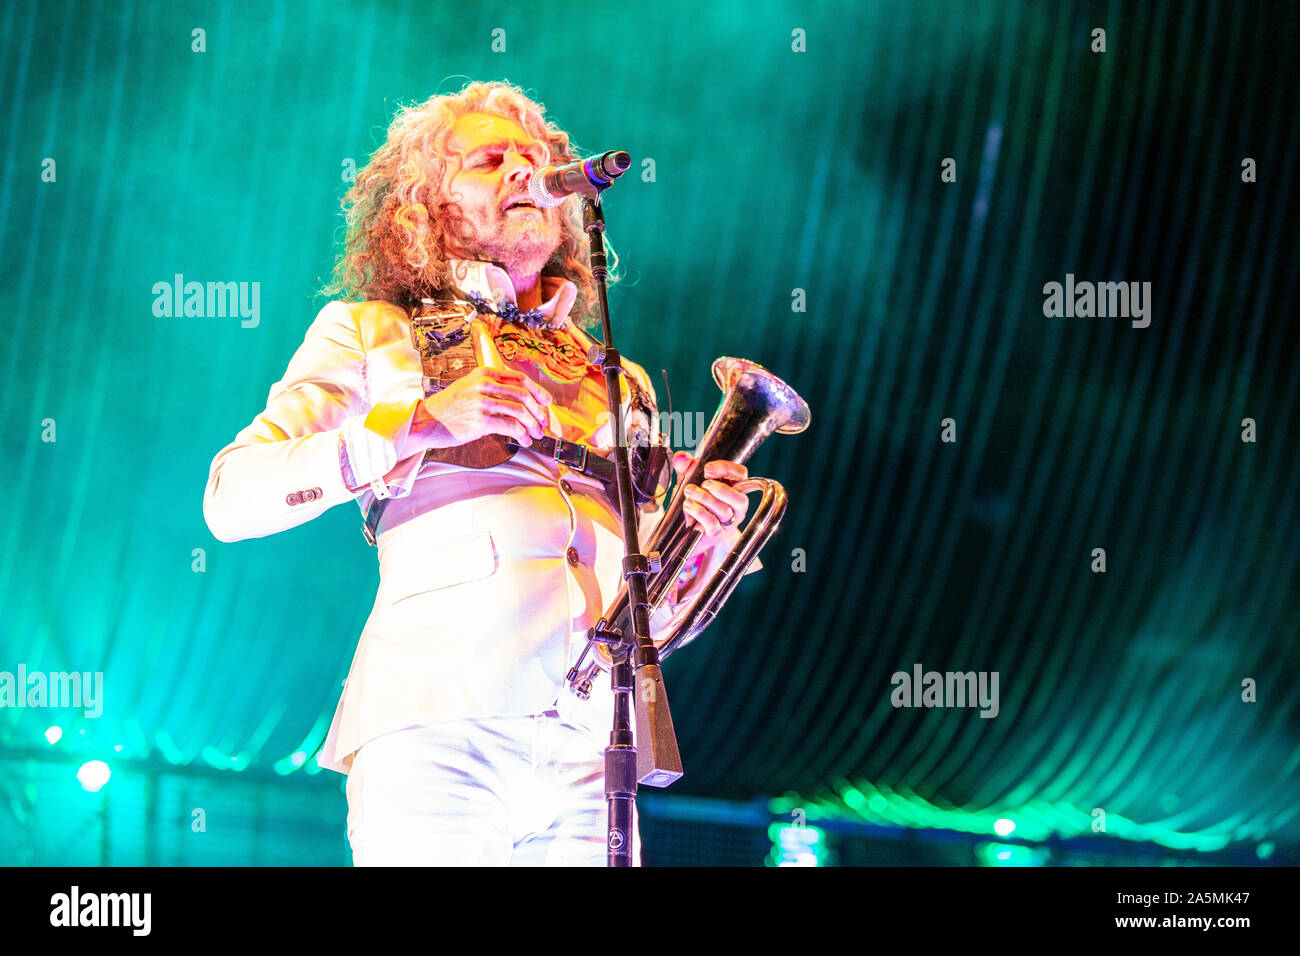 September 13, 2019, Chicago, Illinois, U.S: WAYNE COYNE of The Flaming Lips during the Riot Fest Music Festival at Douglas Park in Chicago, Illinois (Credit Image: © Daniel DeSlover/ZUMA Wire) Stock Photo